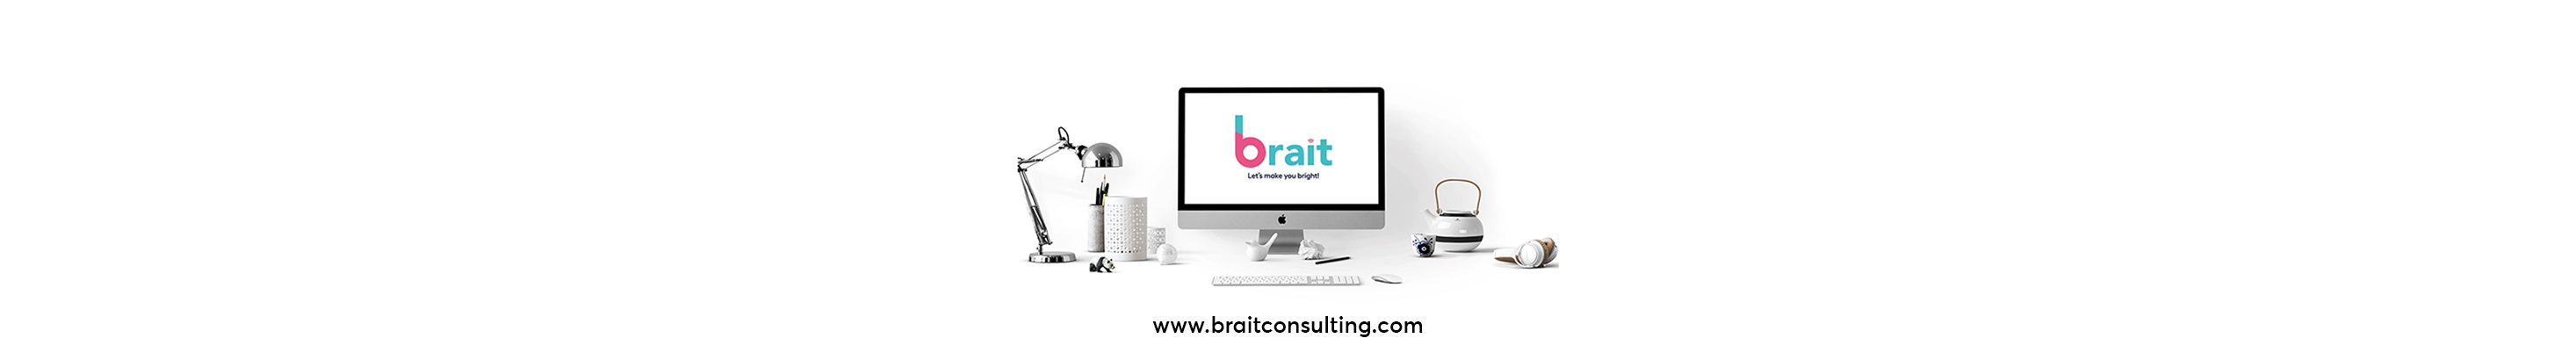 Brait Consulting Limited's profile banner